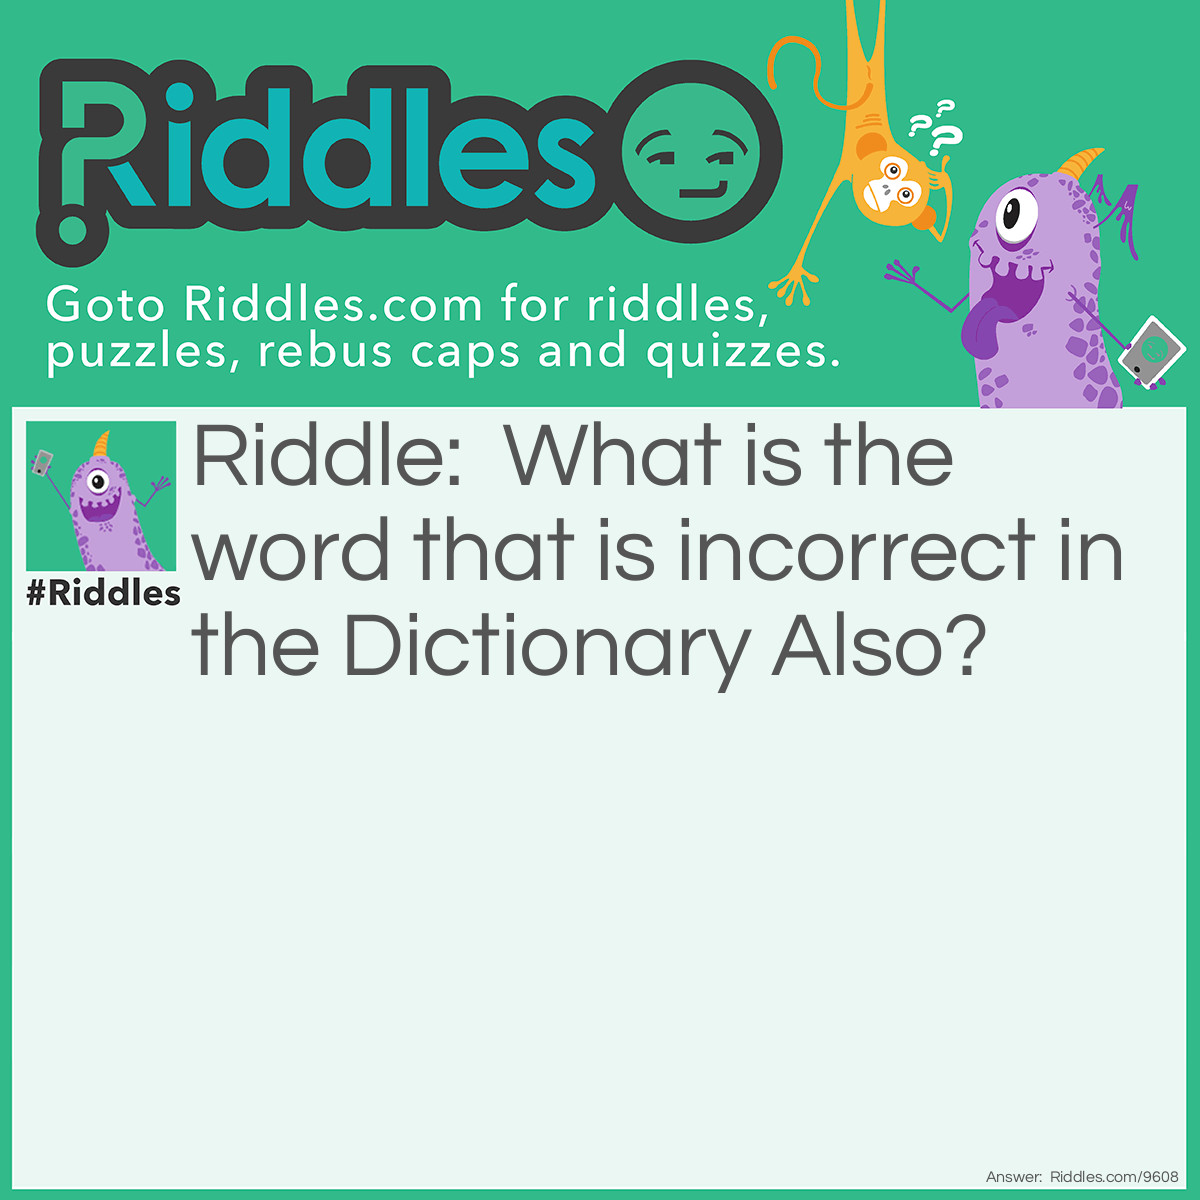 Riddle: What is the word that is incorrect in the Dictionary Also? Answer: Incorrect.